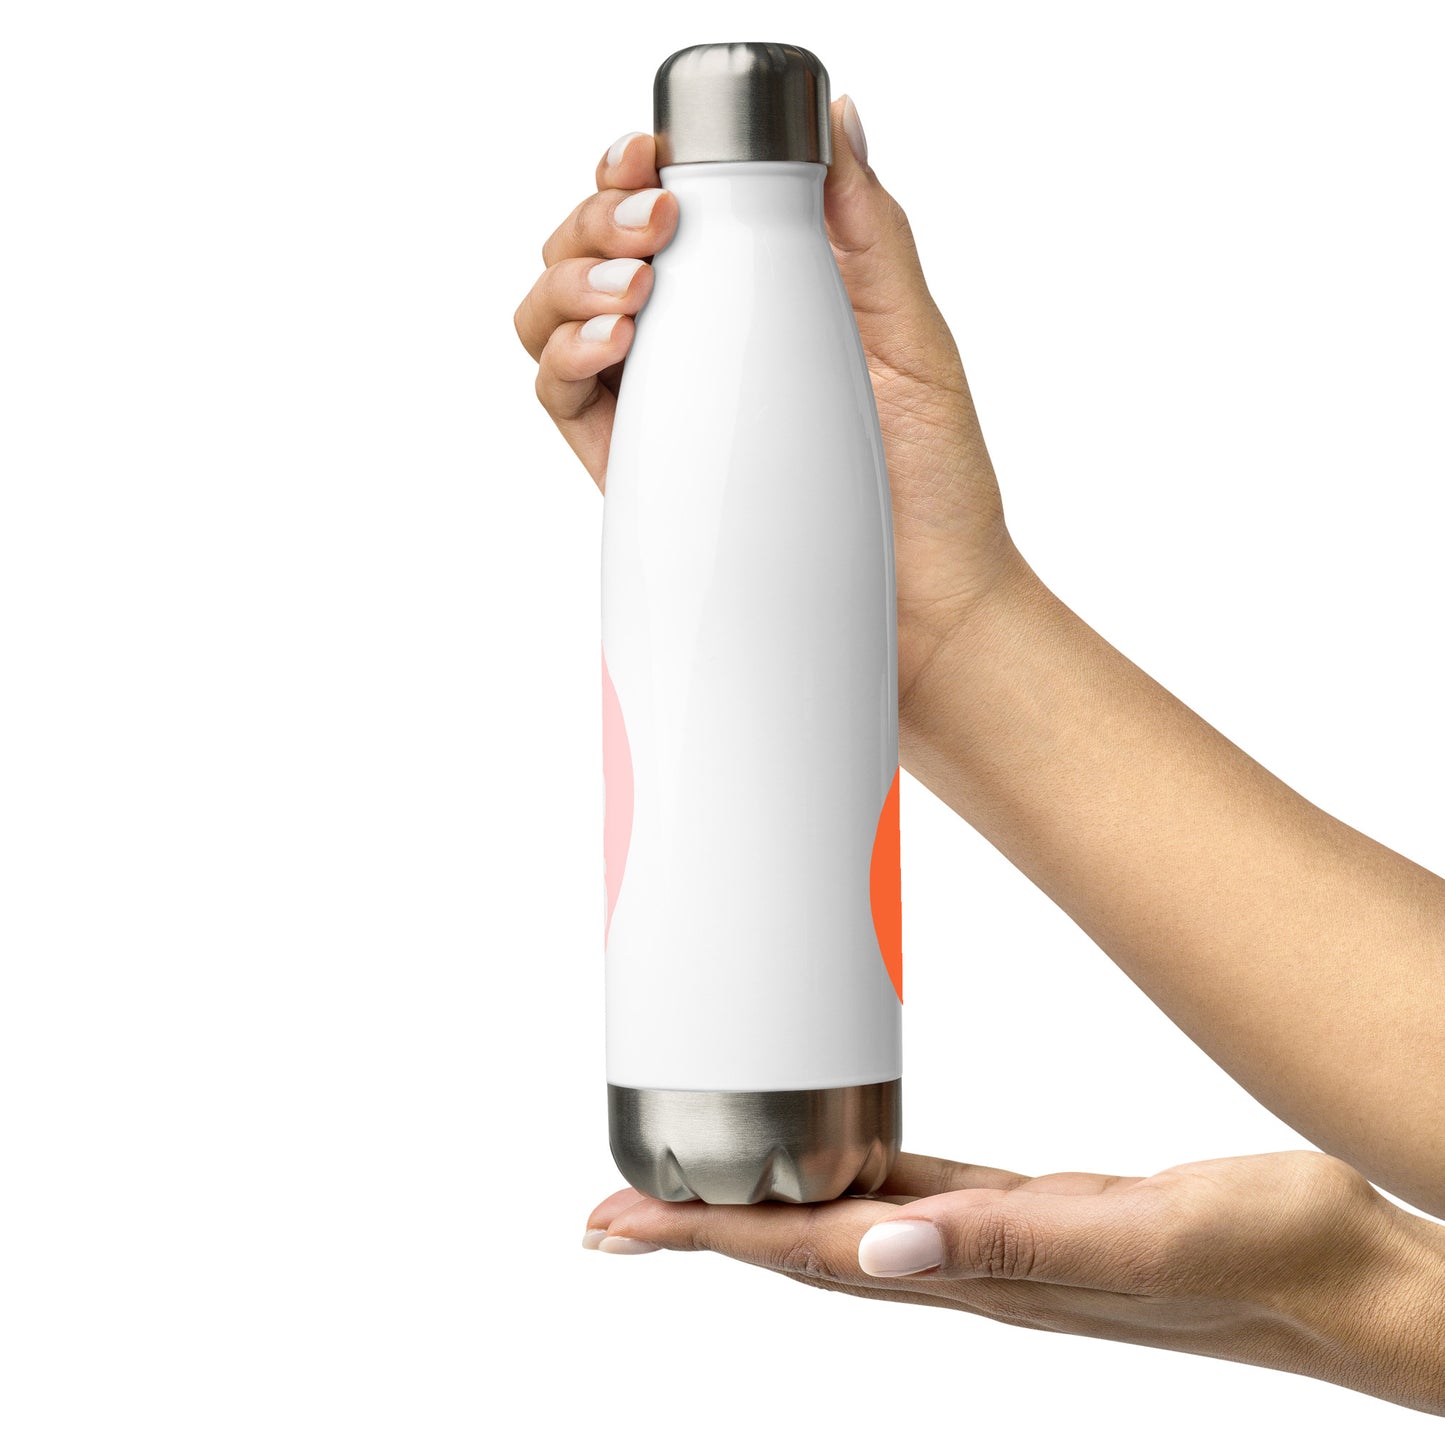 "America Needs Main Streets" Stainless Steel Water Bottle